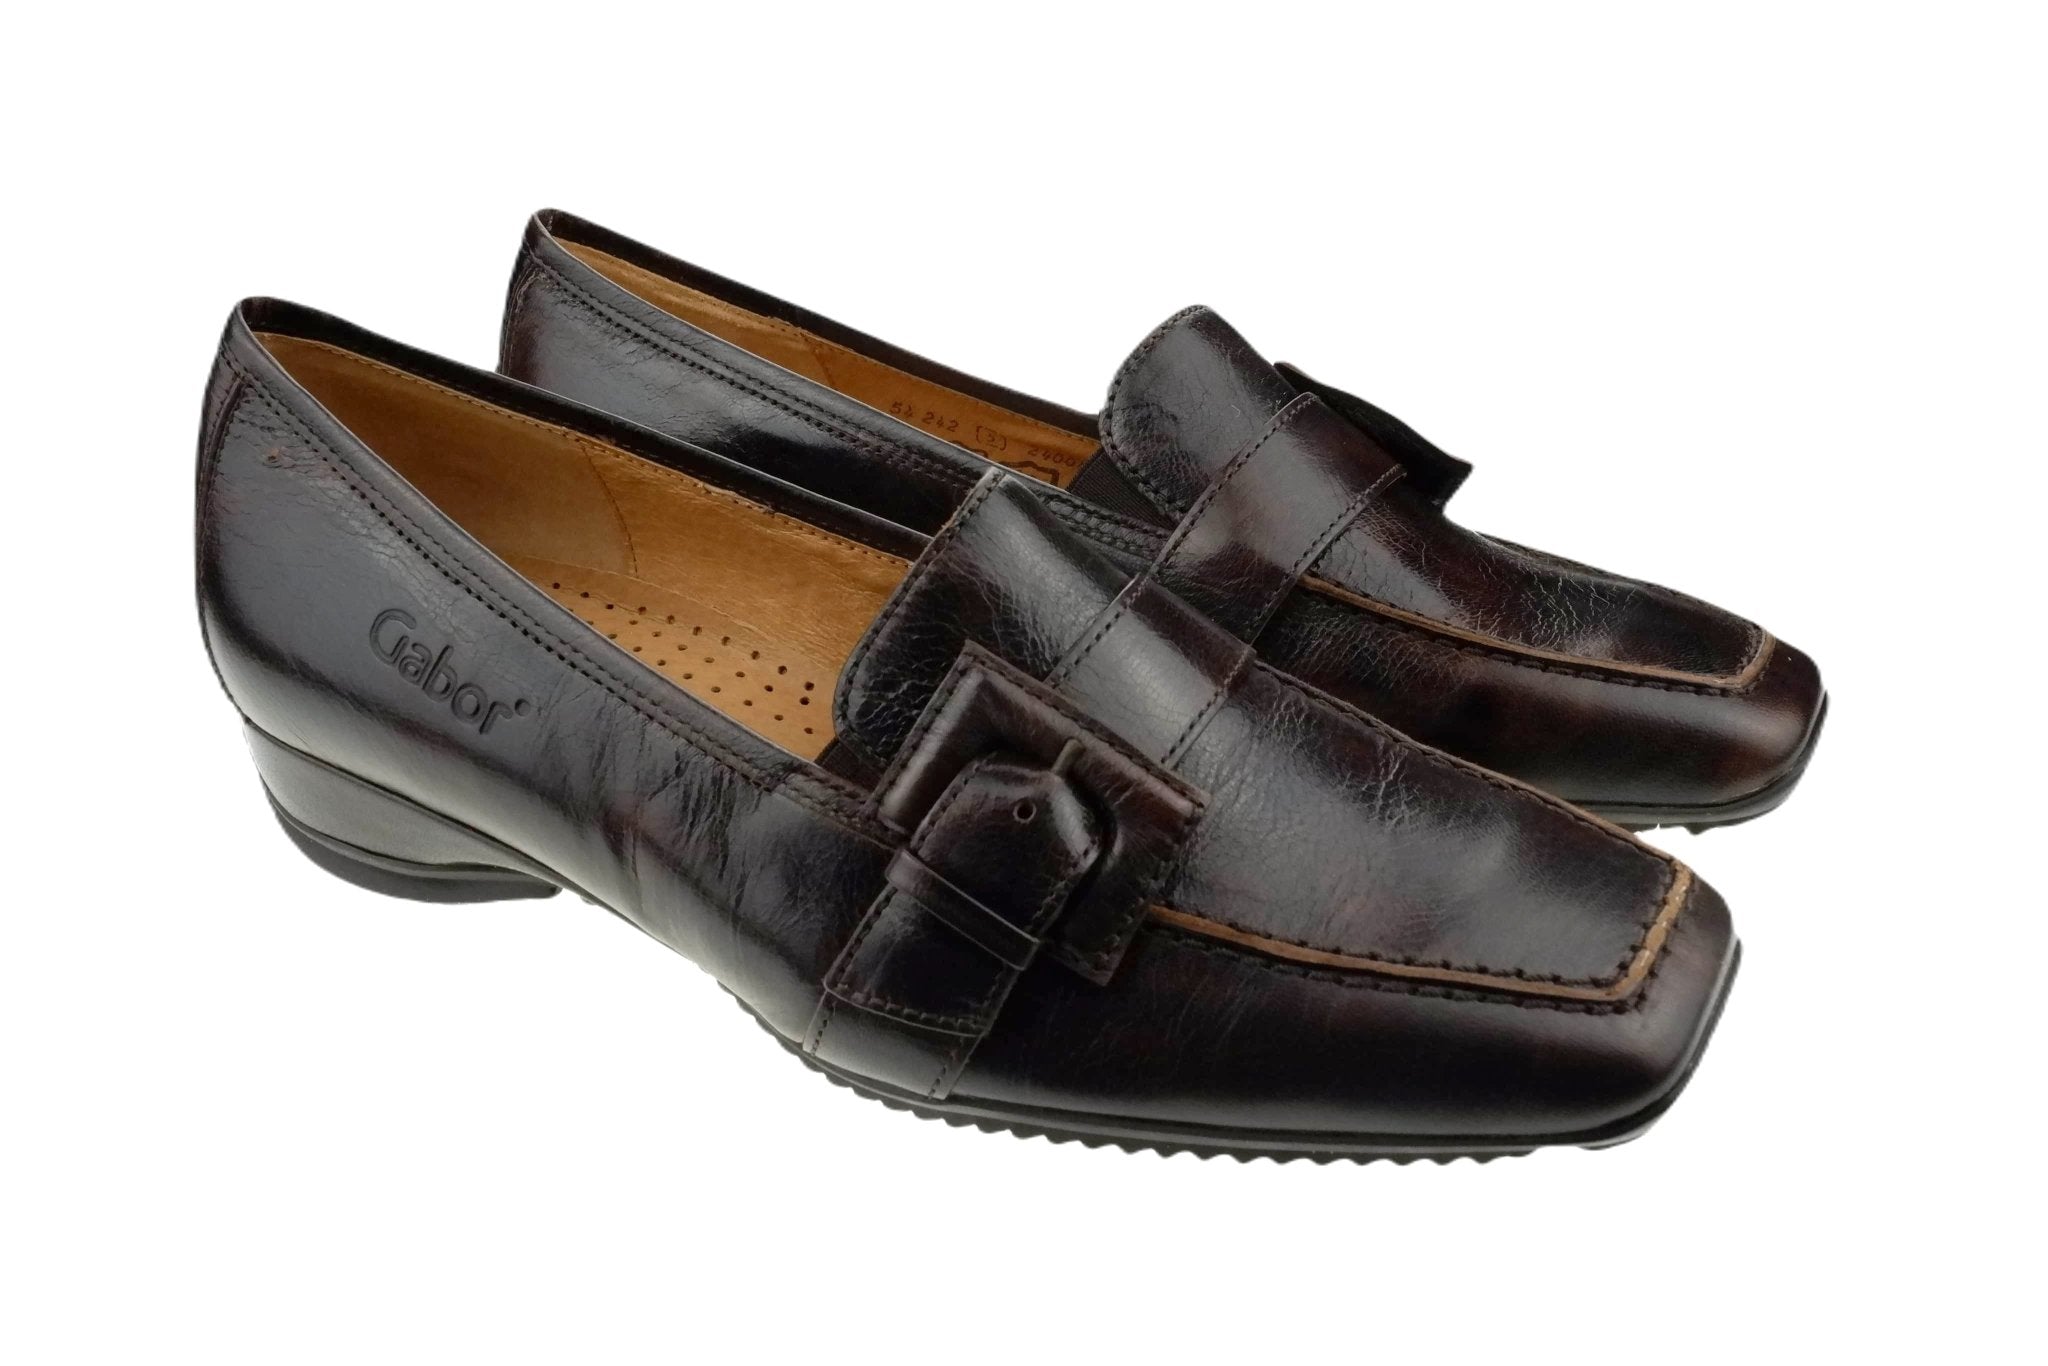 '54.242.34' women's loafer Brown - Chaplinshoes'54.242.34' women's loafer BrownGabor